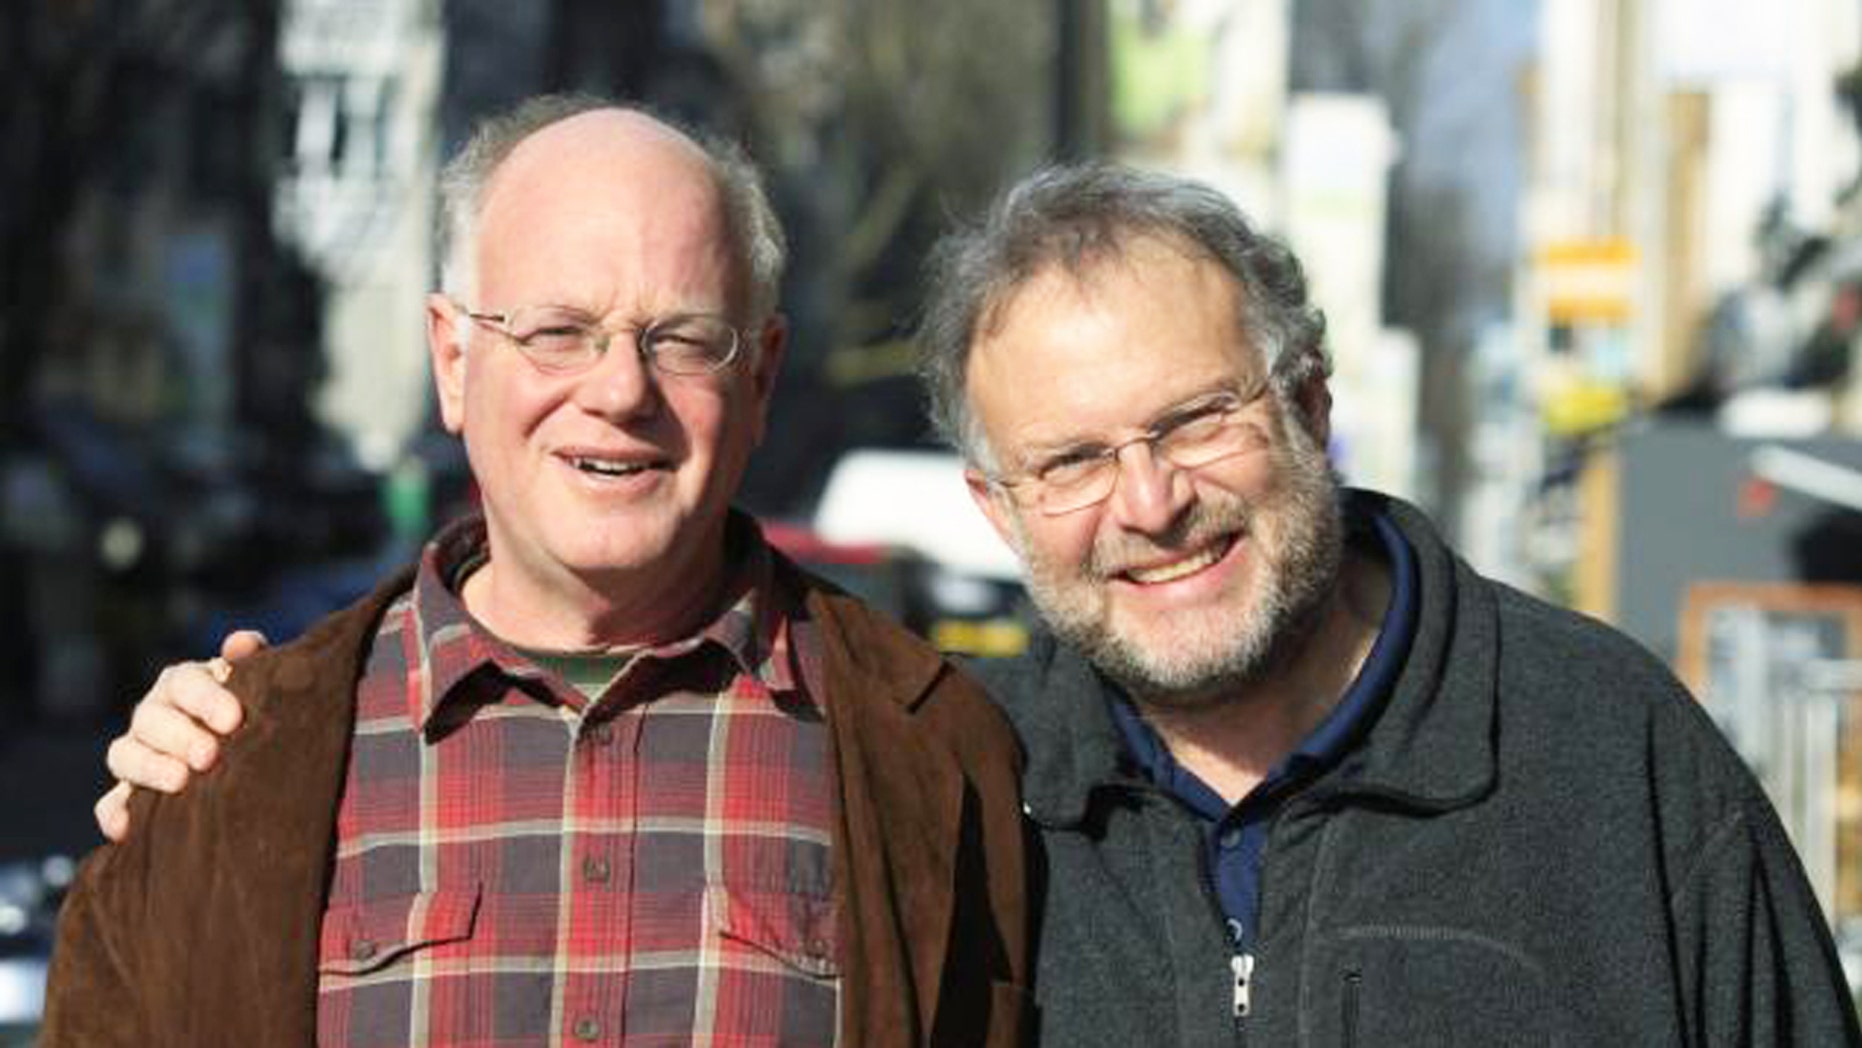 Ben & Jerry's cofounders arrested at US Capitol Fox News